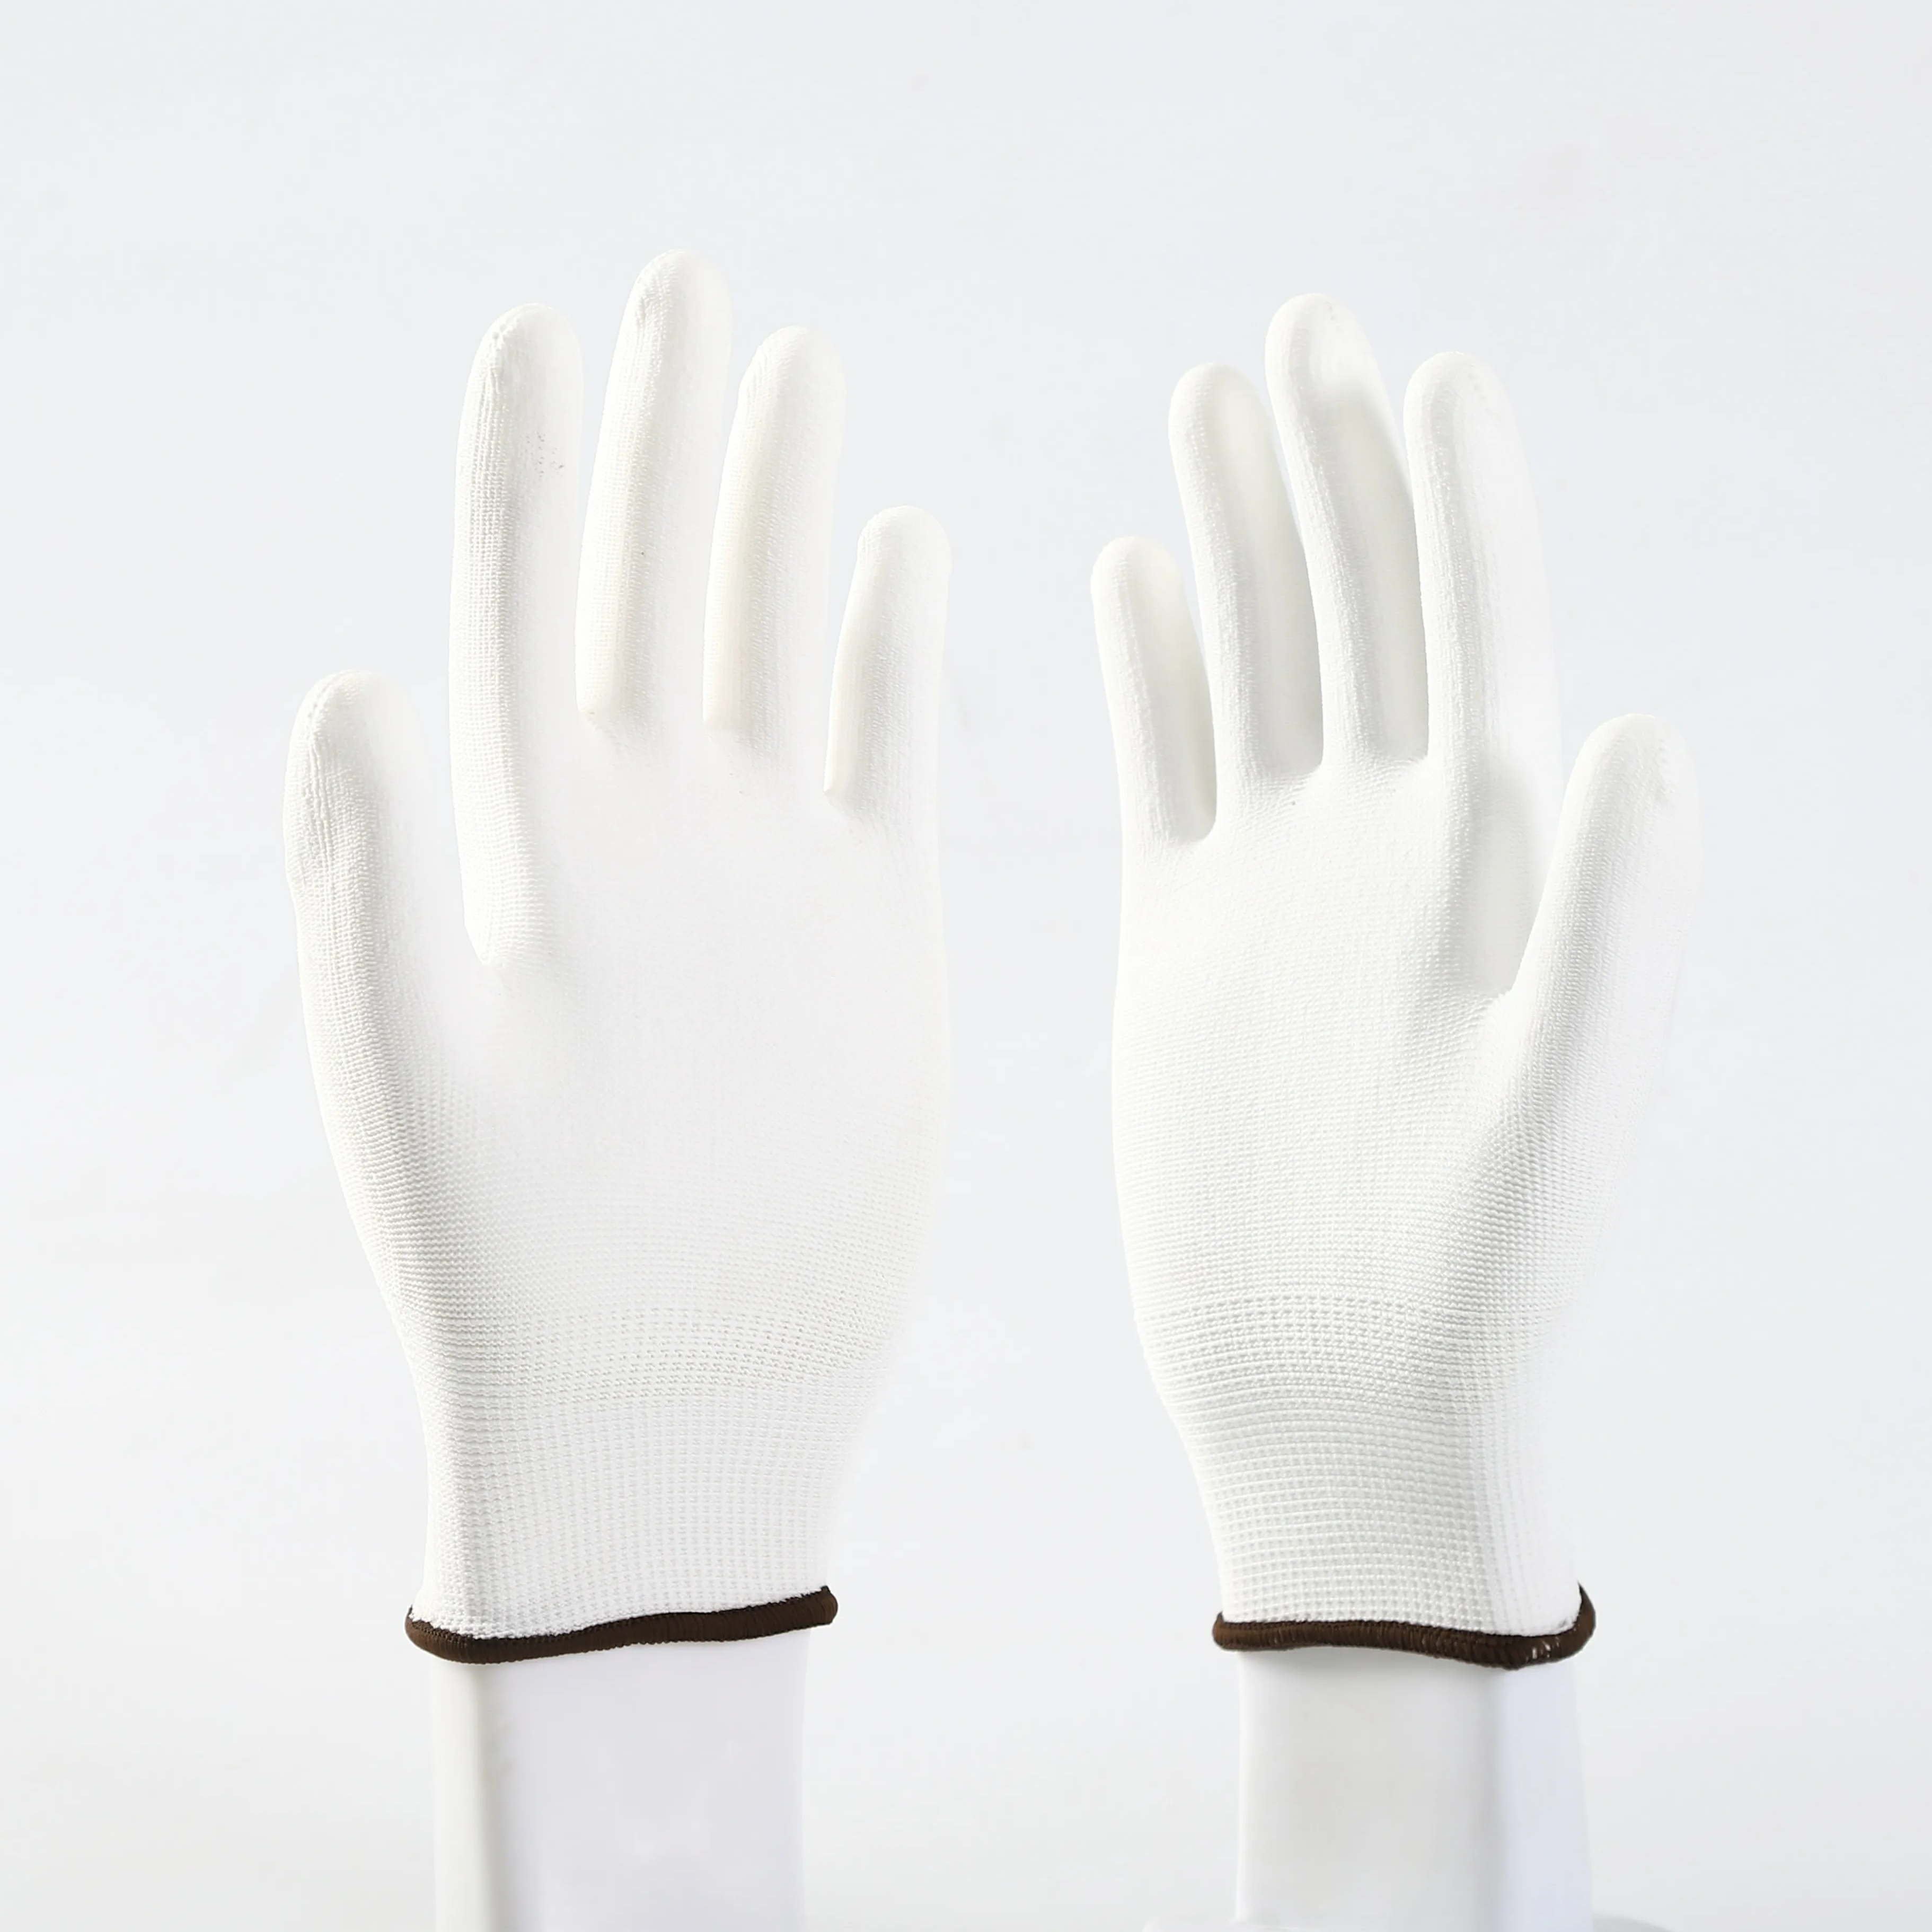 13G PU coated Polyester Gloves Palm dipped with PU light weight safety gloves